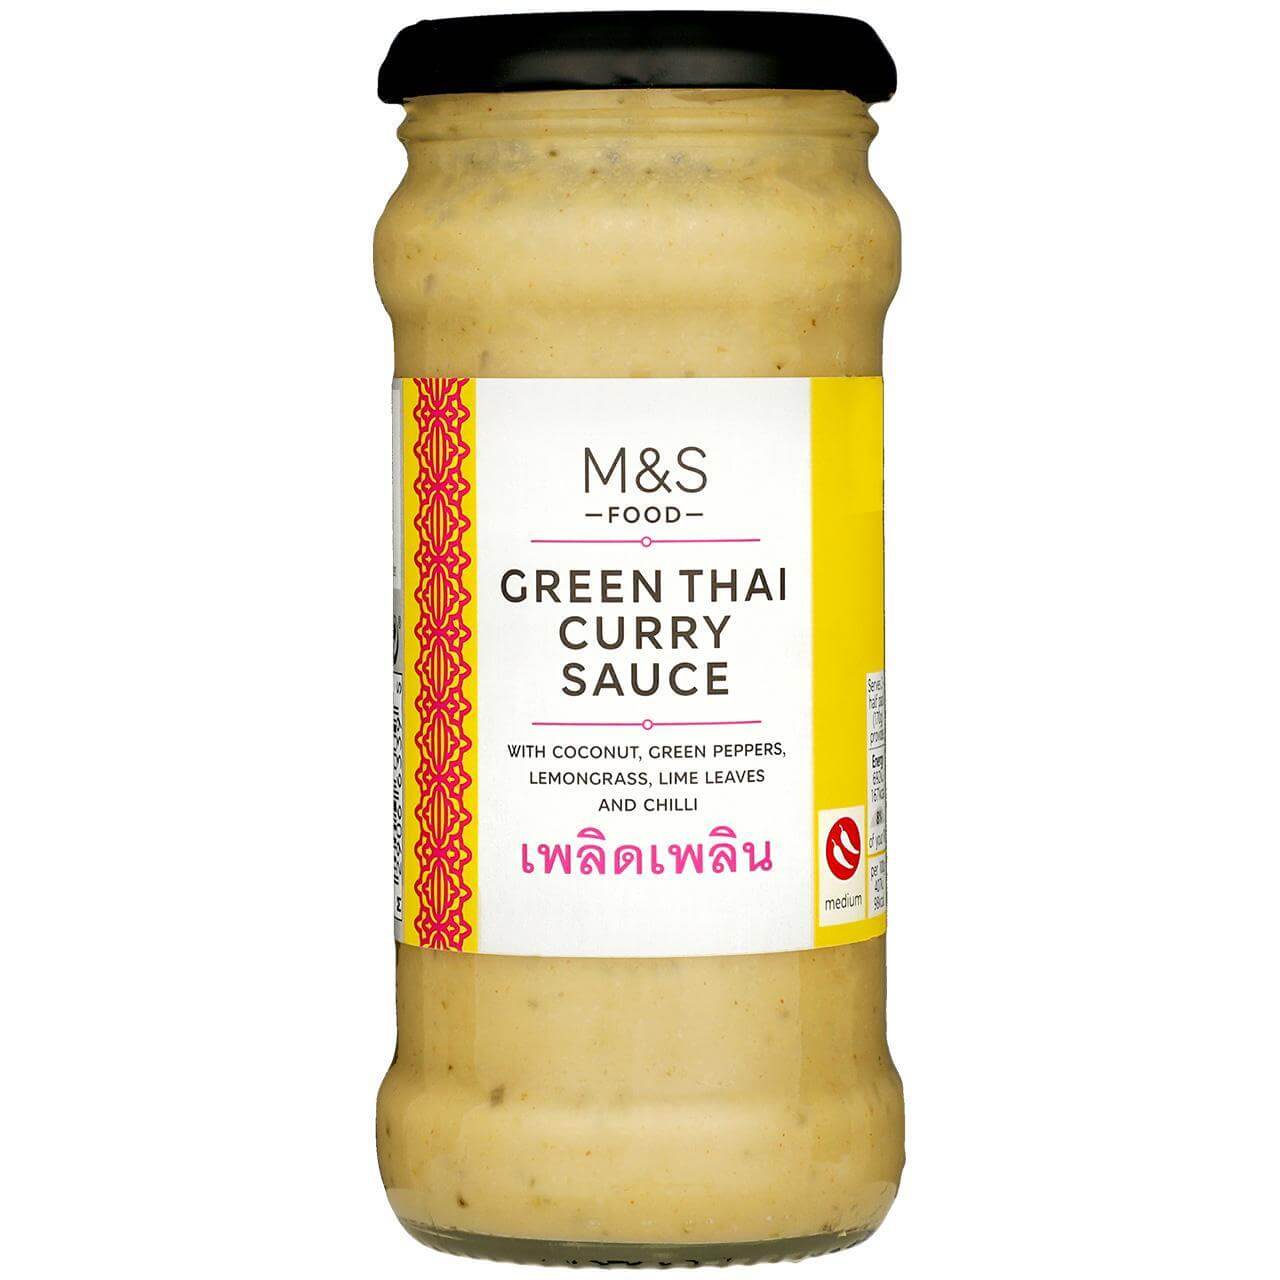 Image of M&S Thai Curry Sauce made in the UK by Marks & Spencer Food. Buying this product supports a UK business, jobs and the local community